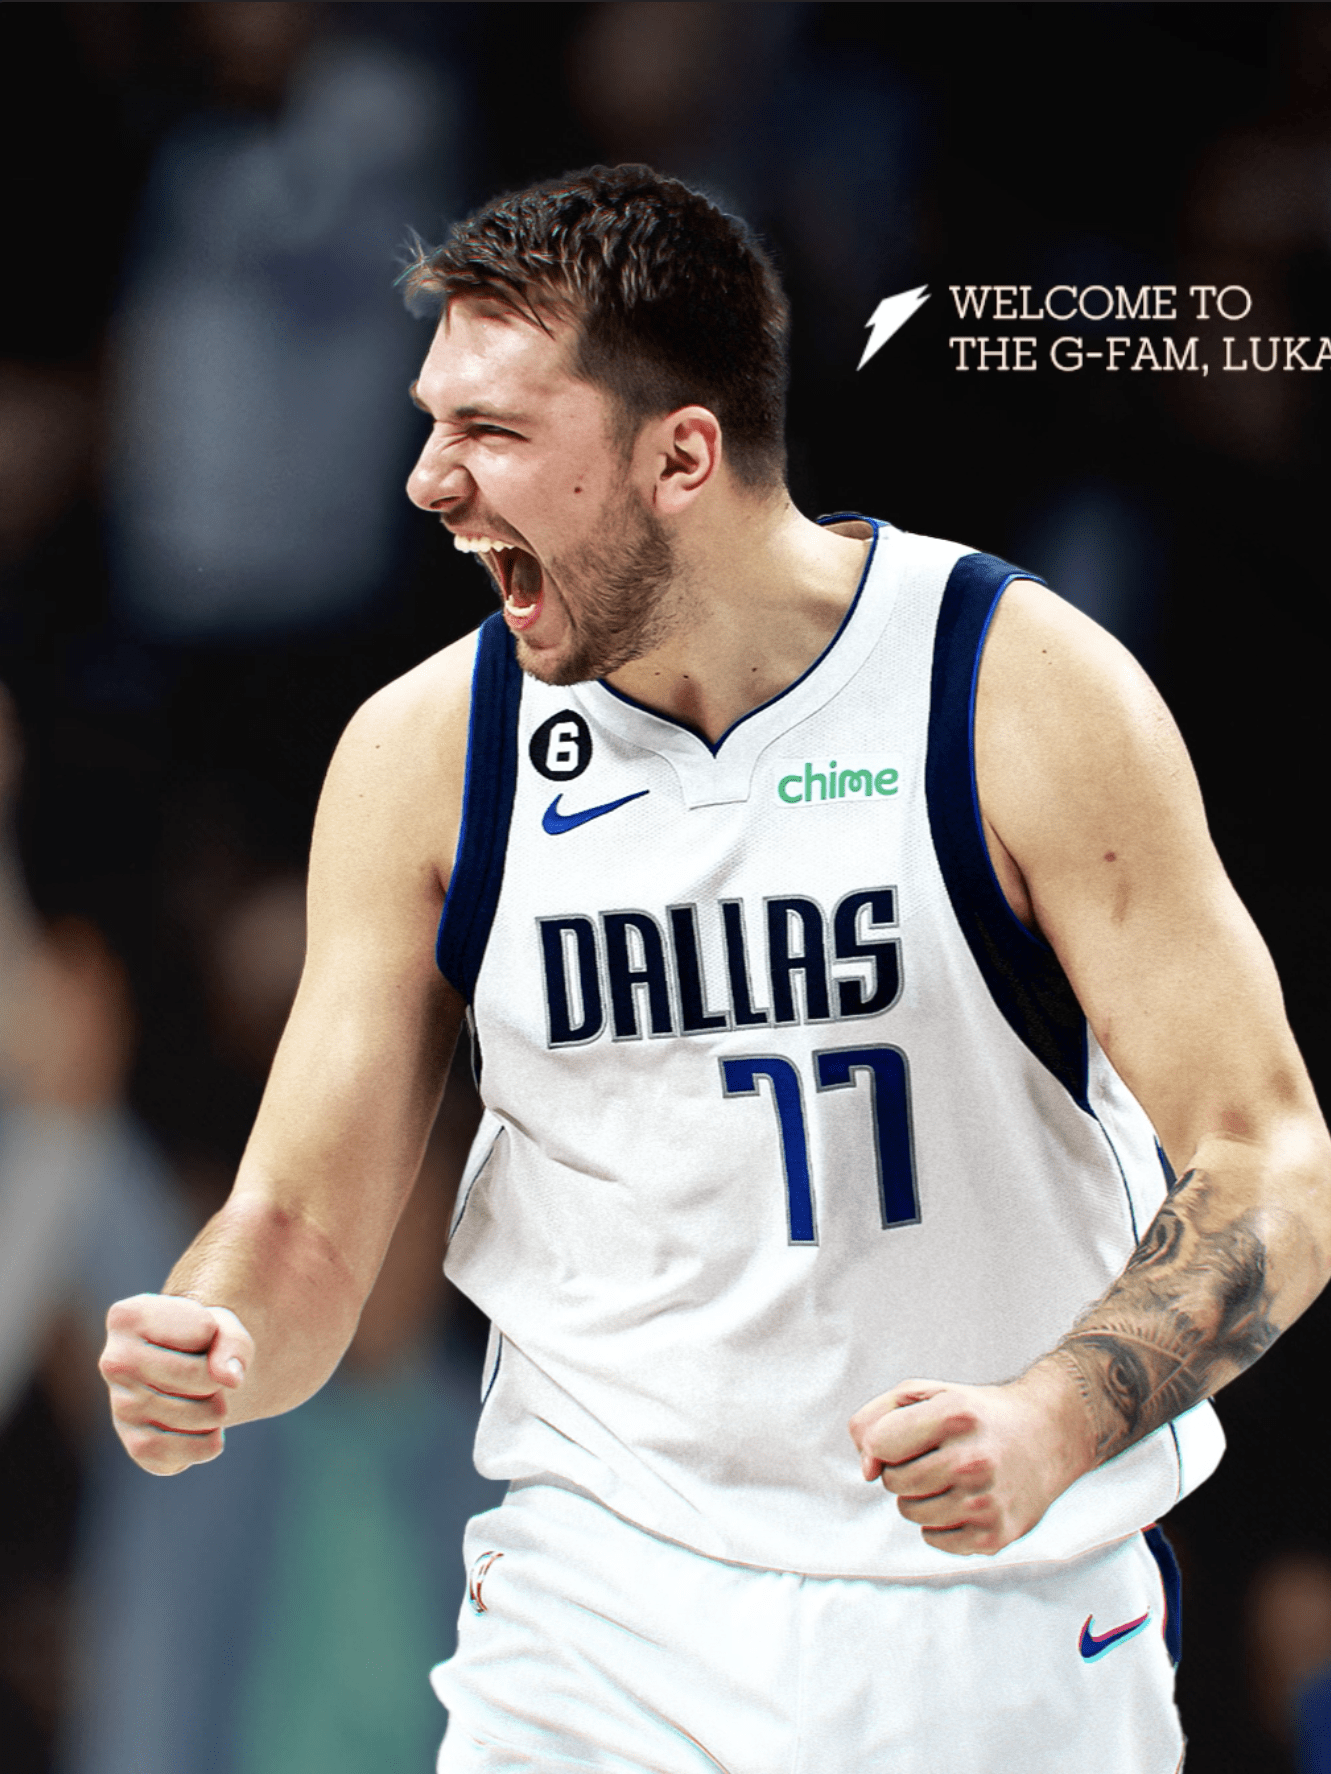 Luka Doncic in a Gatorade promotional poster.